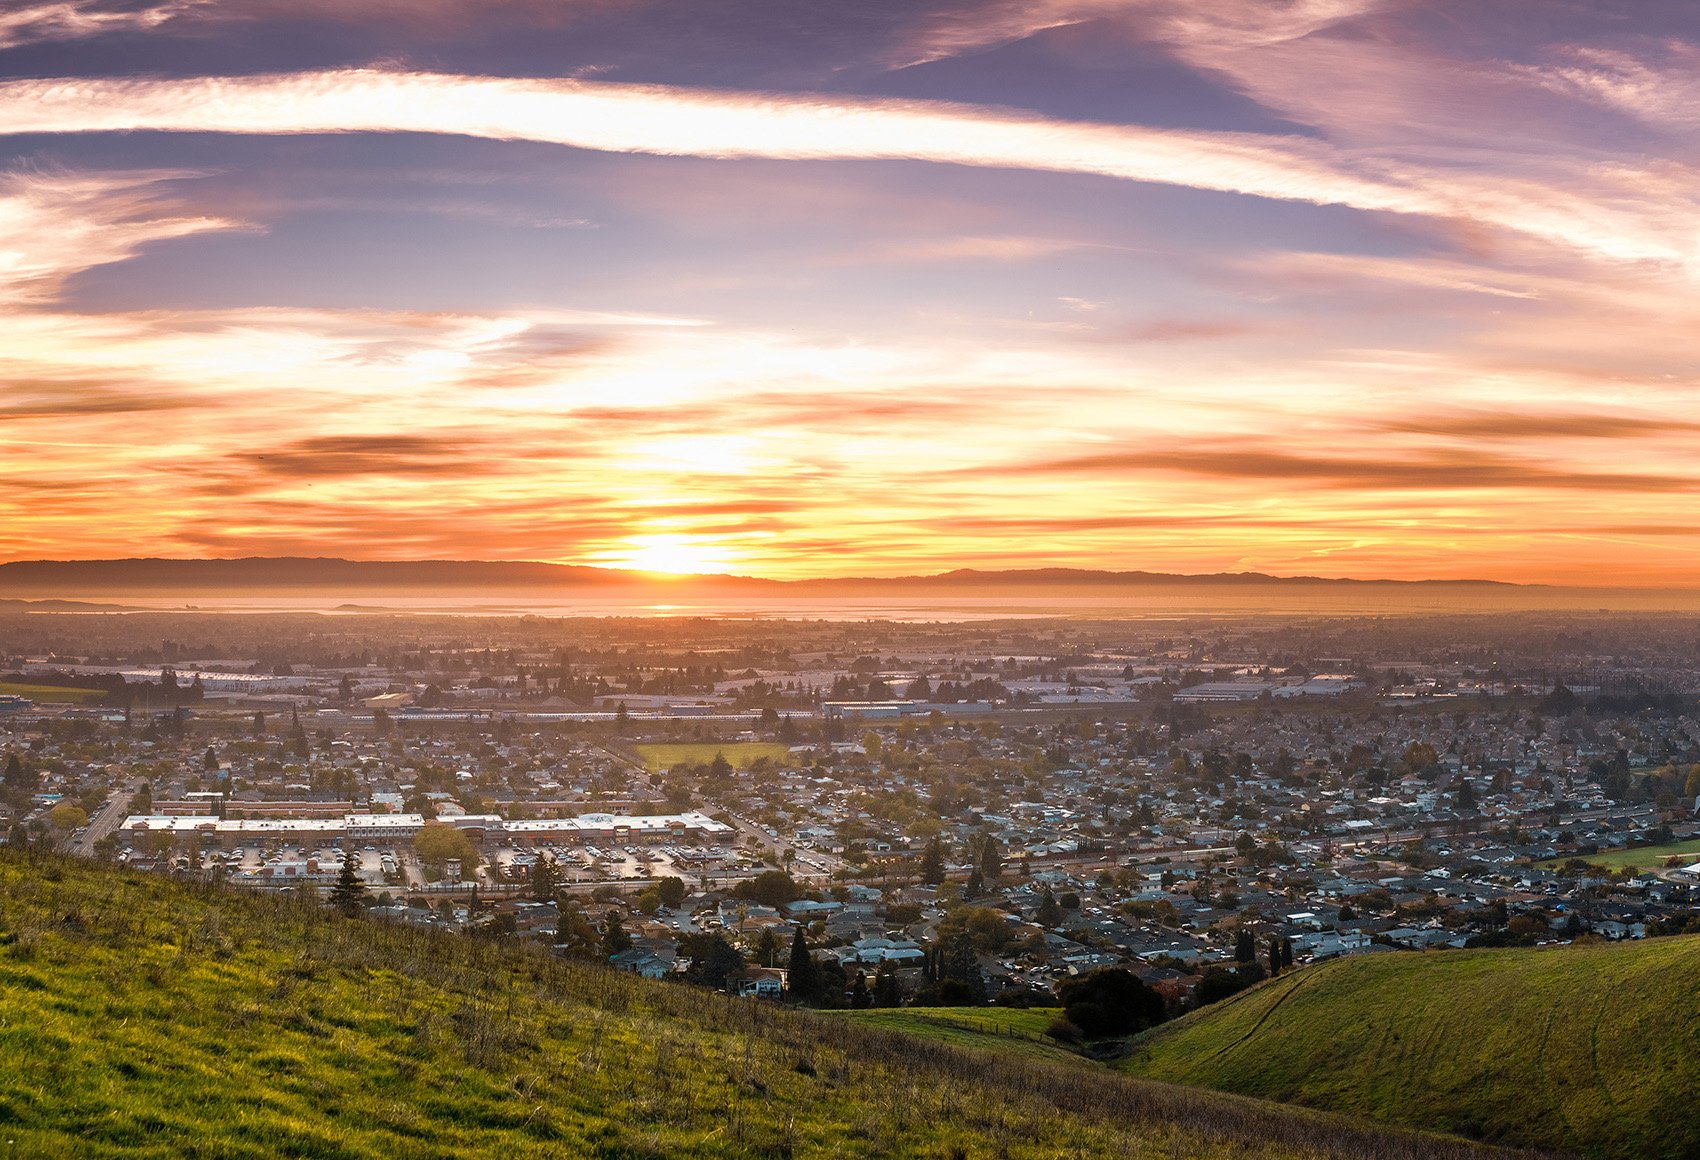 Wide shot of the city of Hayward in the Silicon Valley region of California, with a sunset in the horizon